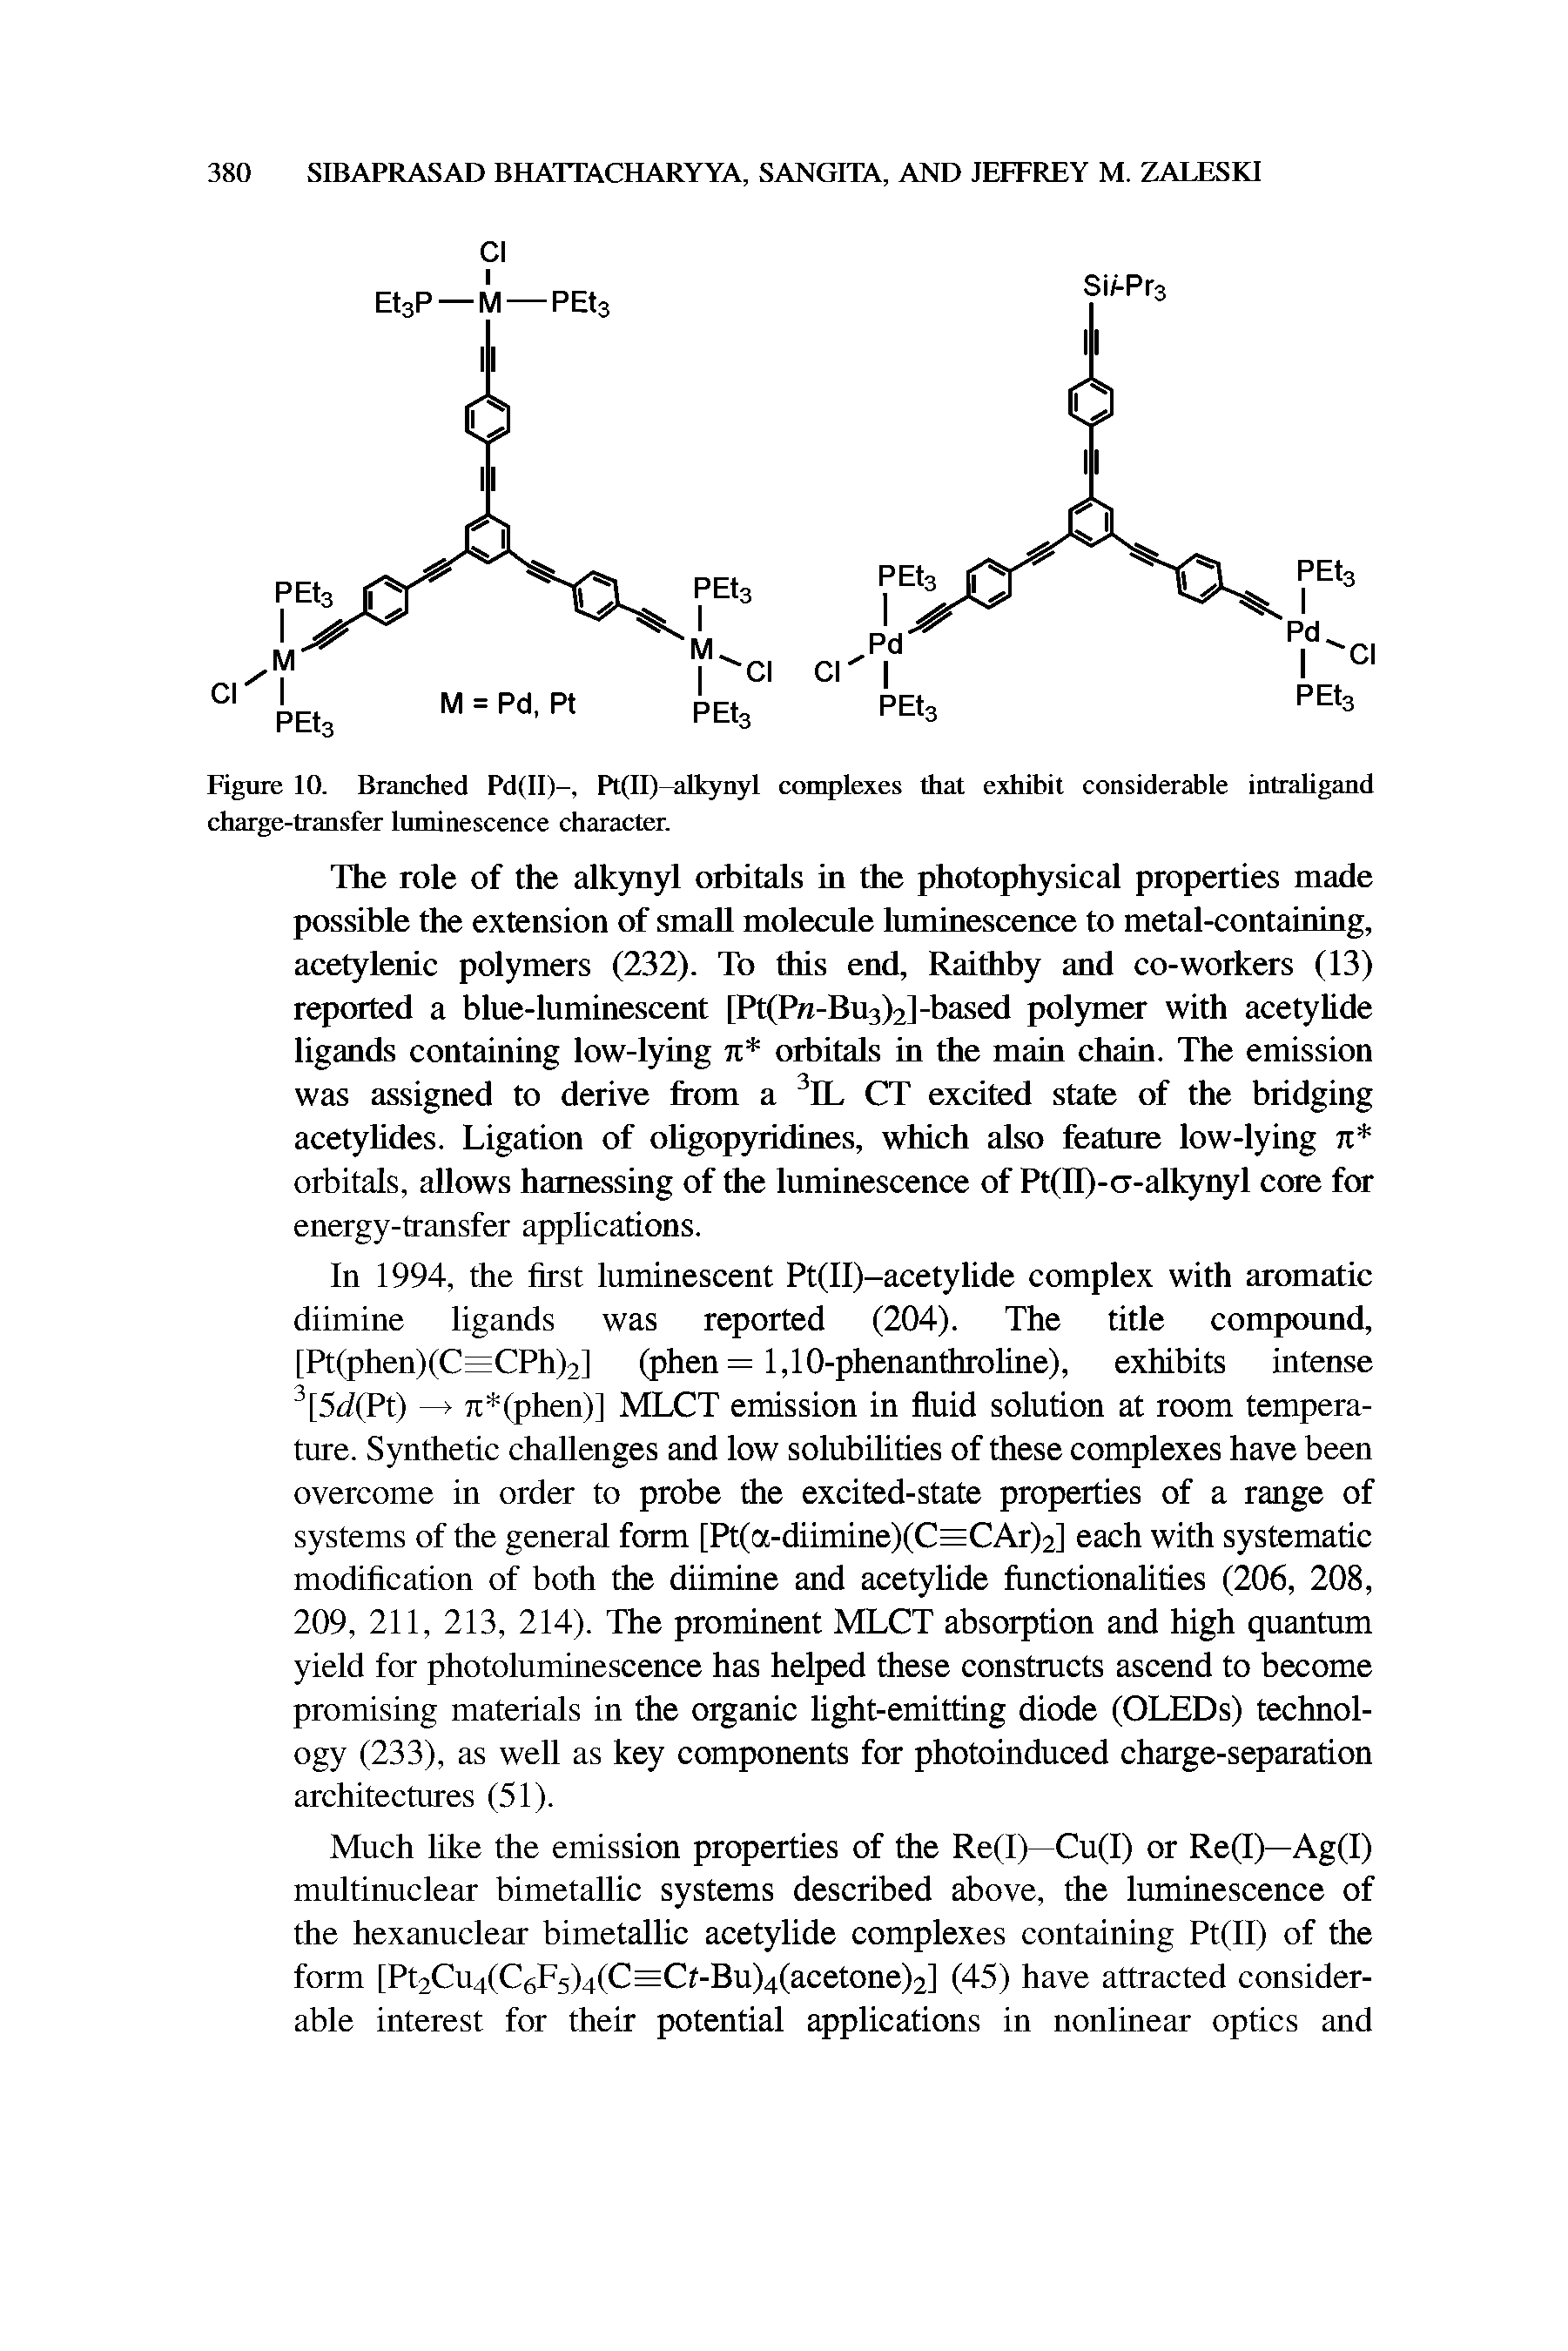 Figure 10. Branched Pd(II)-, Pt(II)-alkynyl complexes that exhibit considerable intraUgand charge-transfer luminescence character.